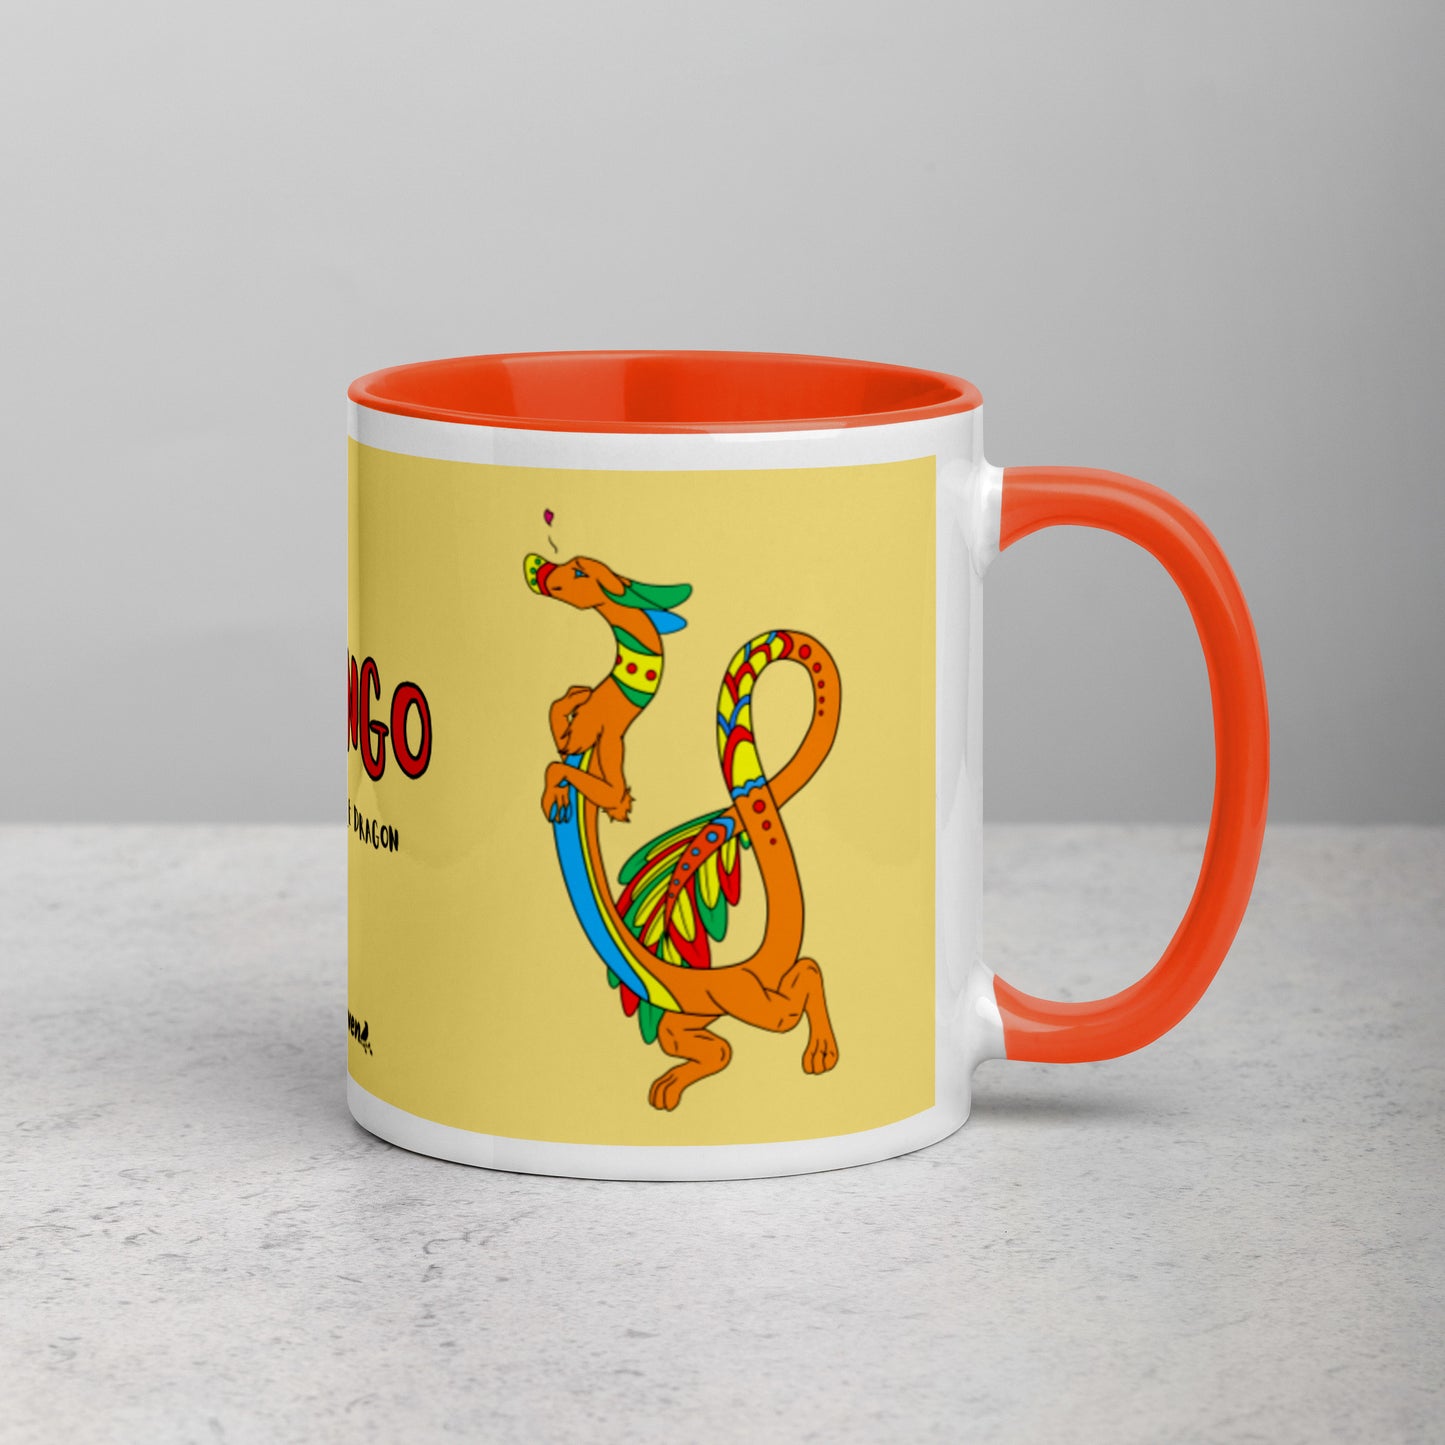 11 ounce white ceramic mug featuring a double-sided image of Domingo the Fuzzy Noodle Dragon against a light yellow background. Orange inside and handle color. Shown on tabletop with handle facing right.